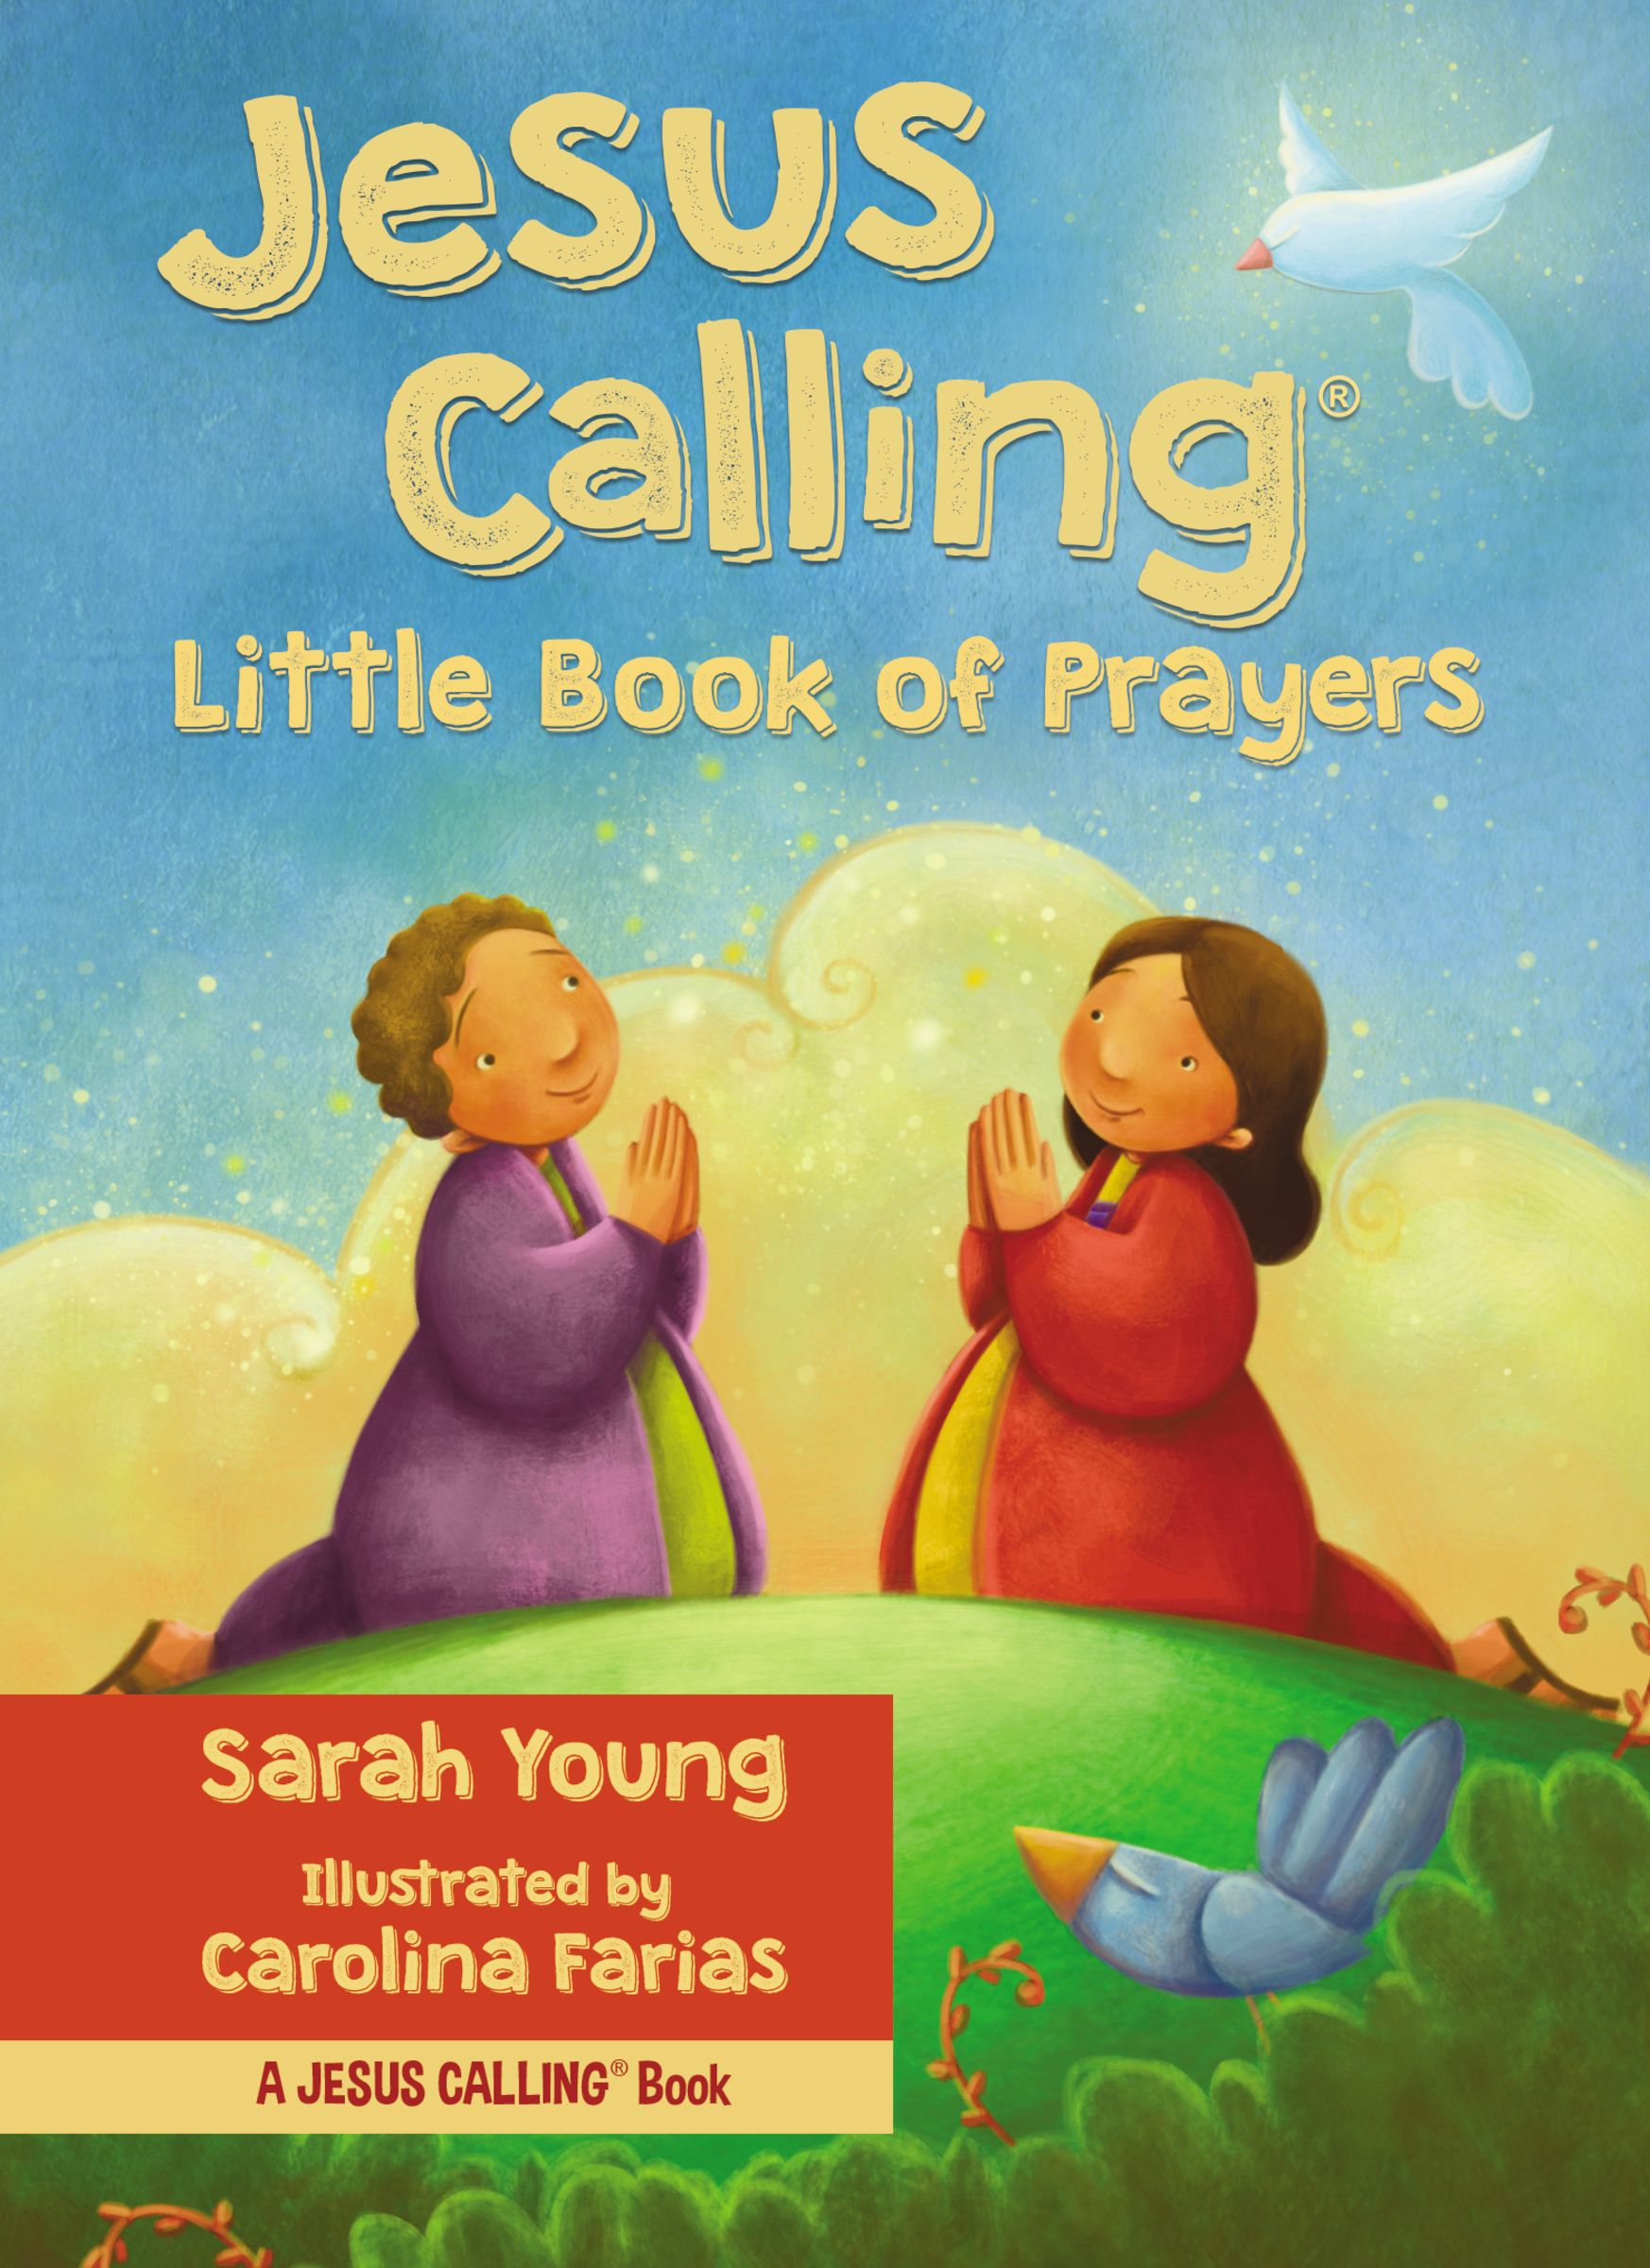 Jesus Calling Little Book of Prayers by Sarah Young Fast